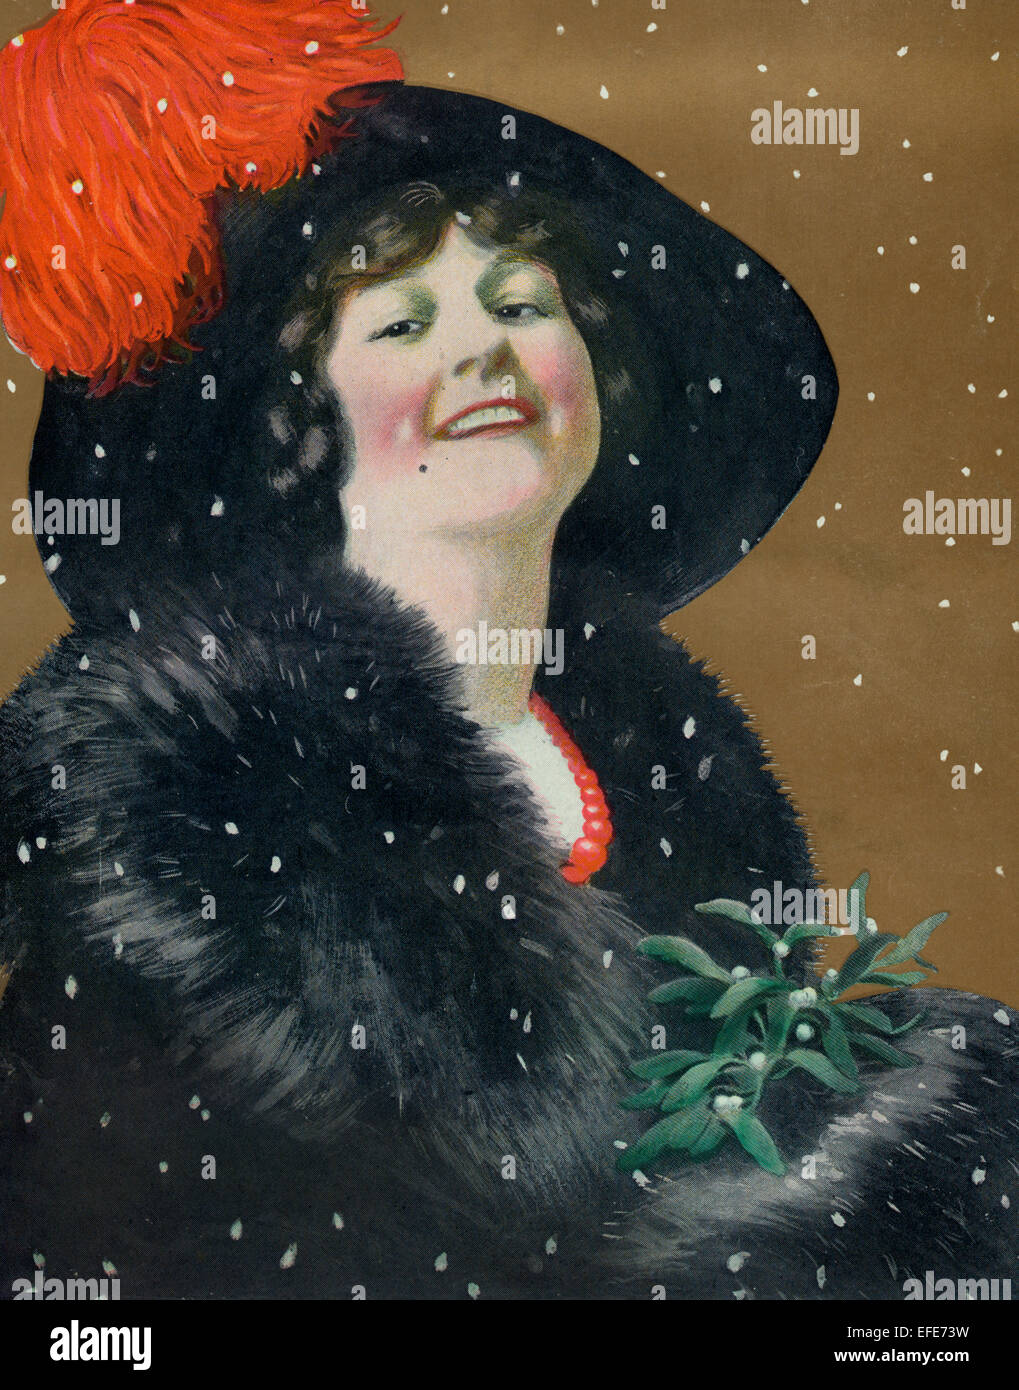 Christmas 1911 a Illustration shows snow falling on a beautiful woman wearing a large hat, holding mistletoe. Stock Photo